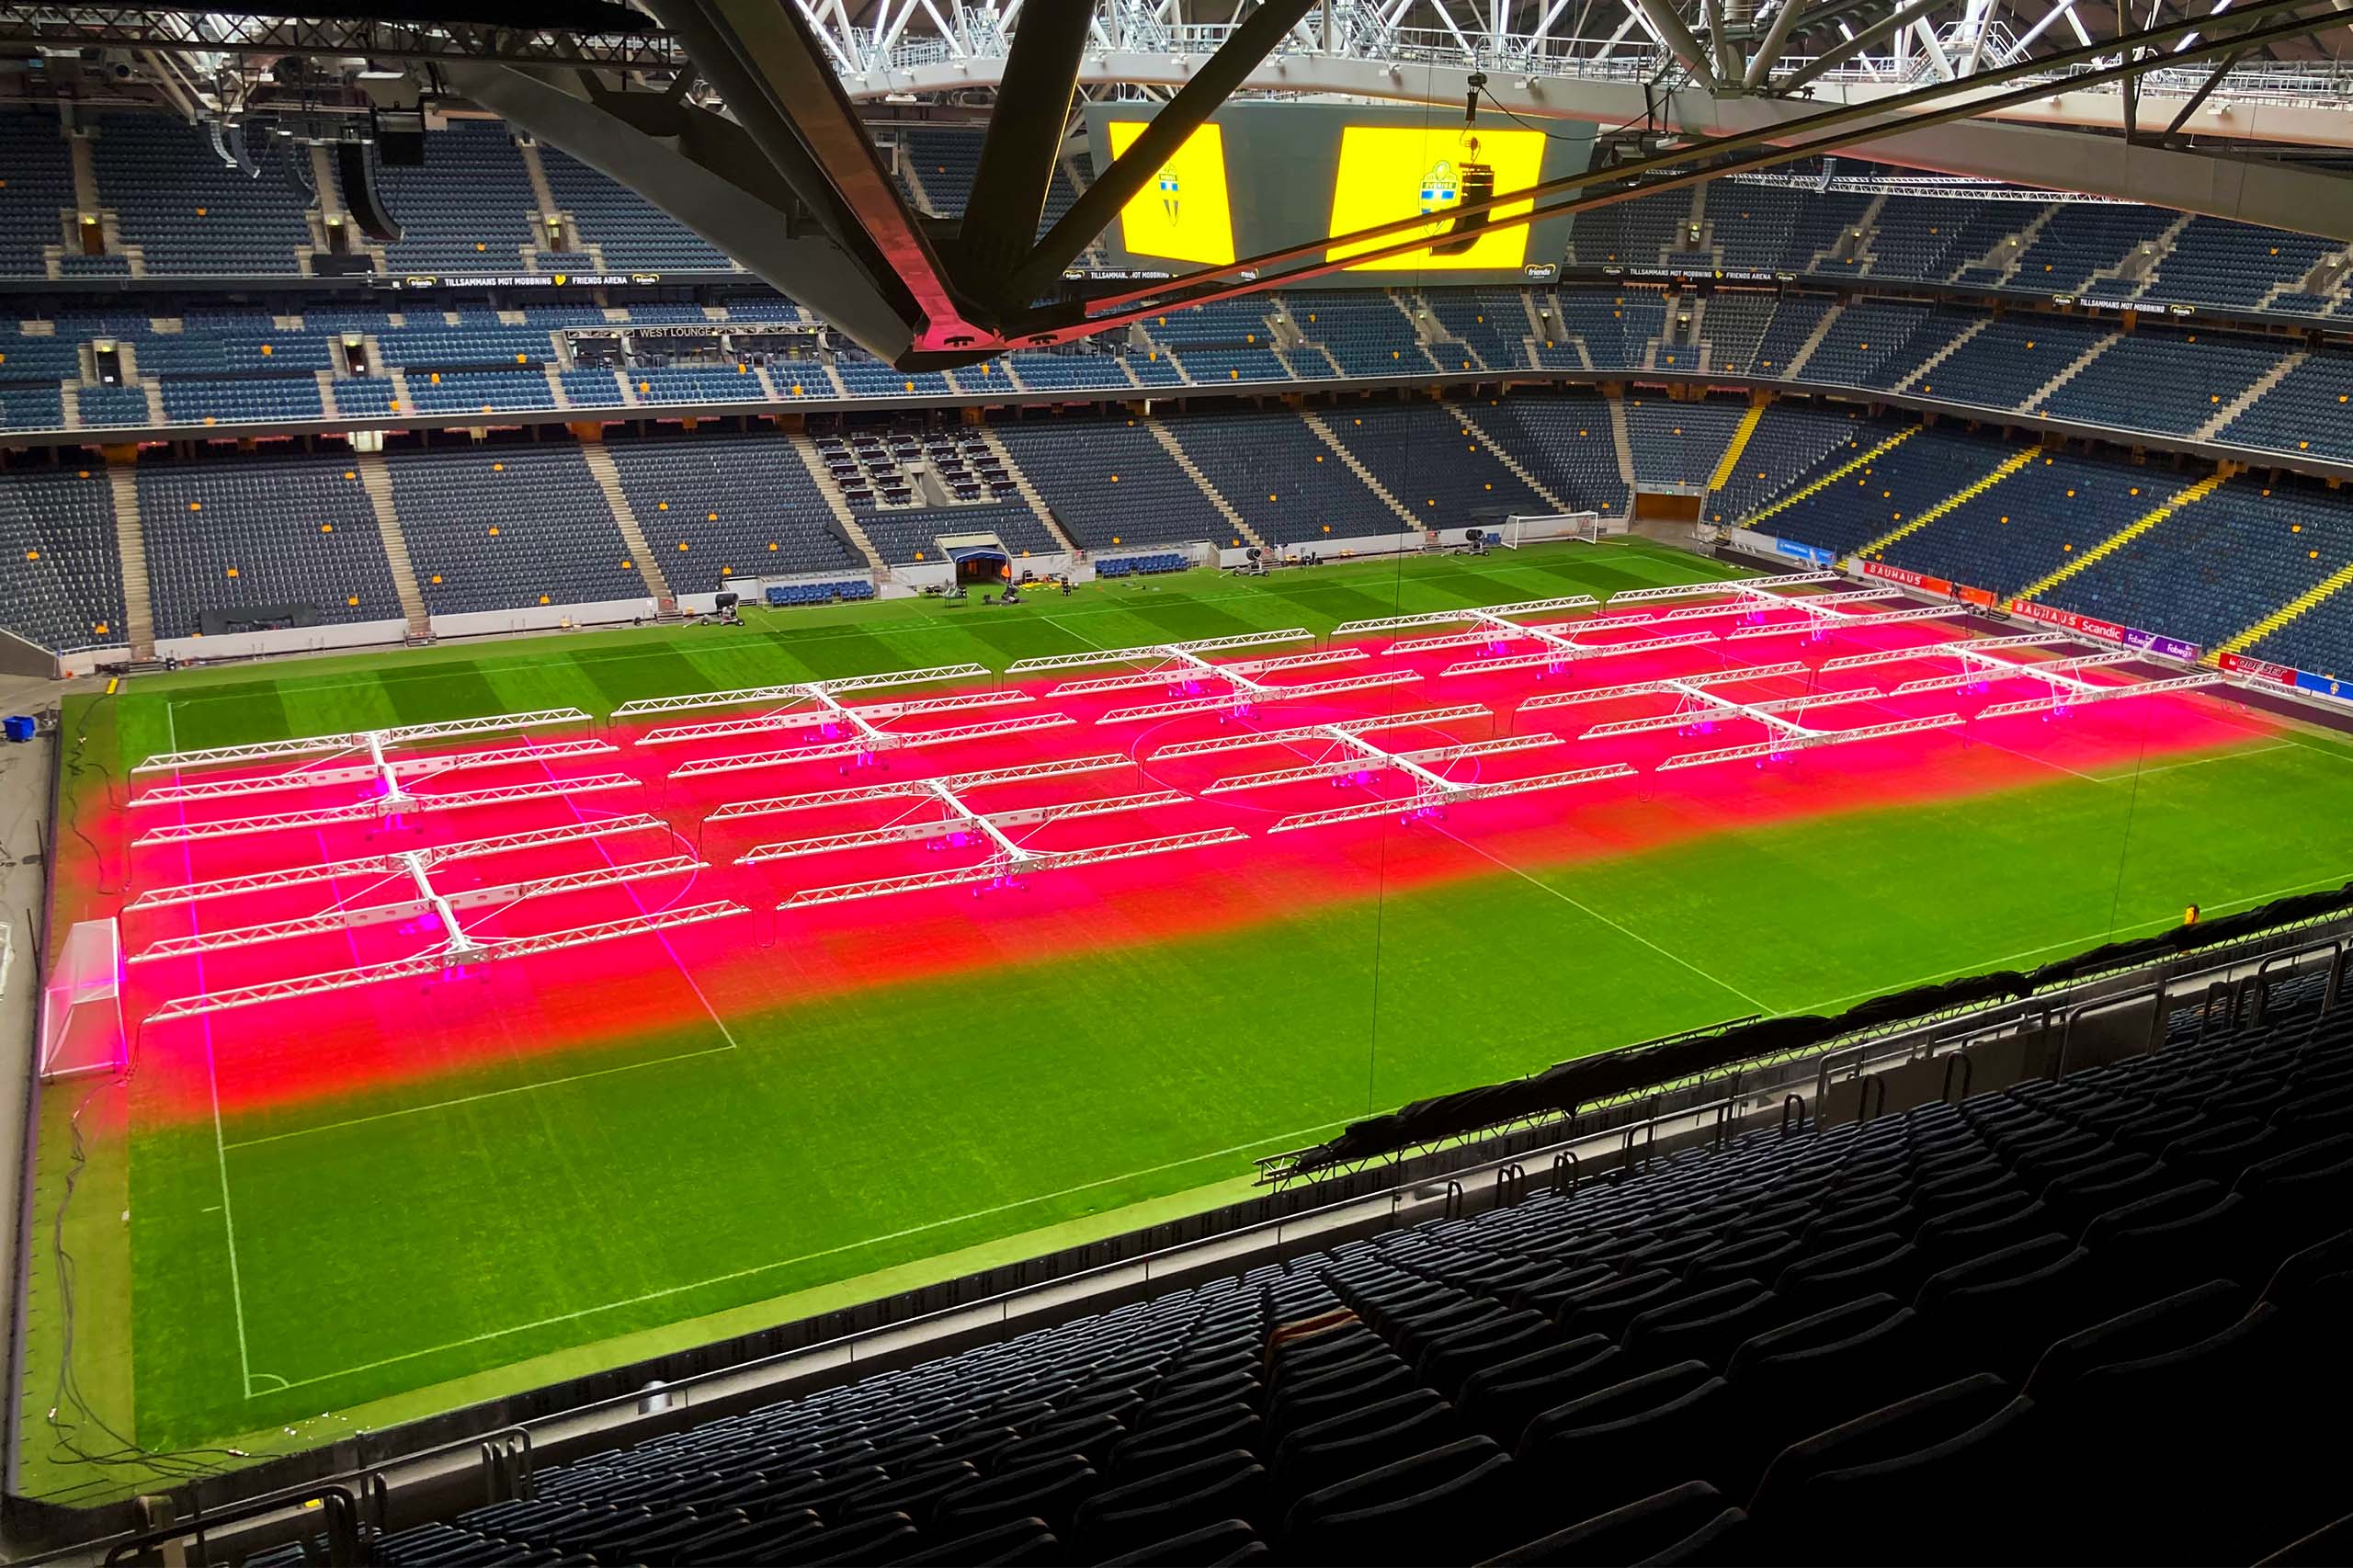 Ten SGL LED440 grow lighting systems on the pitch of the Friends Arena.